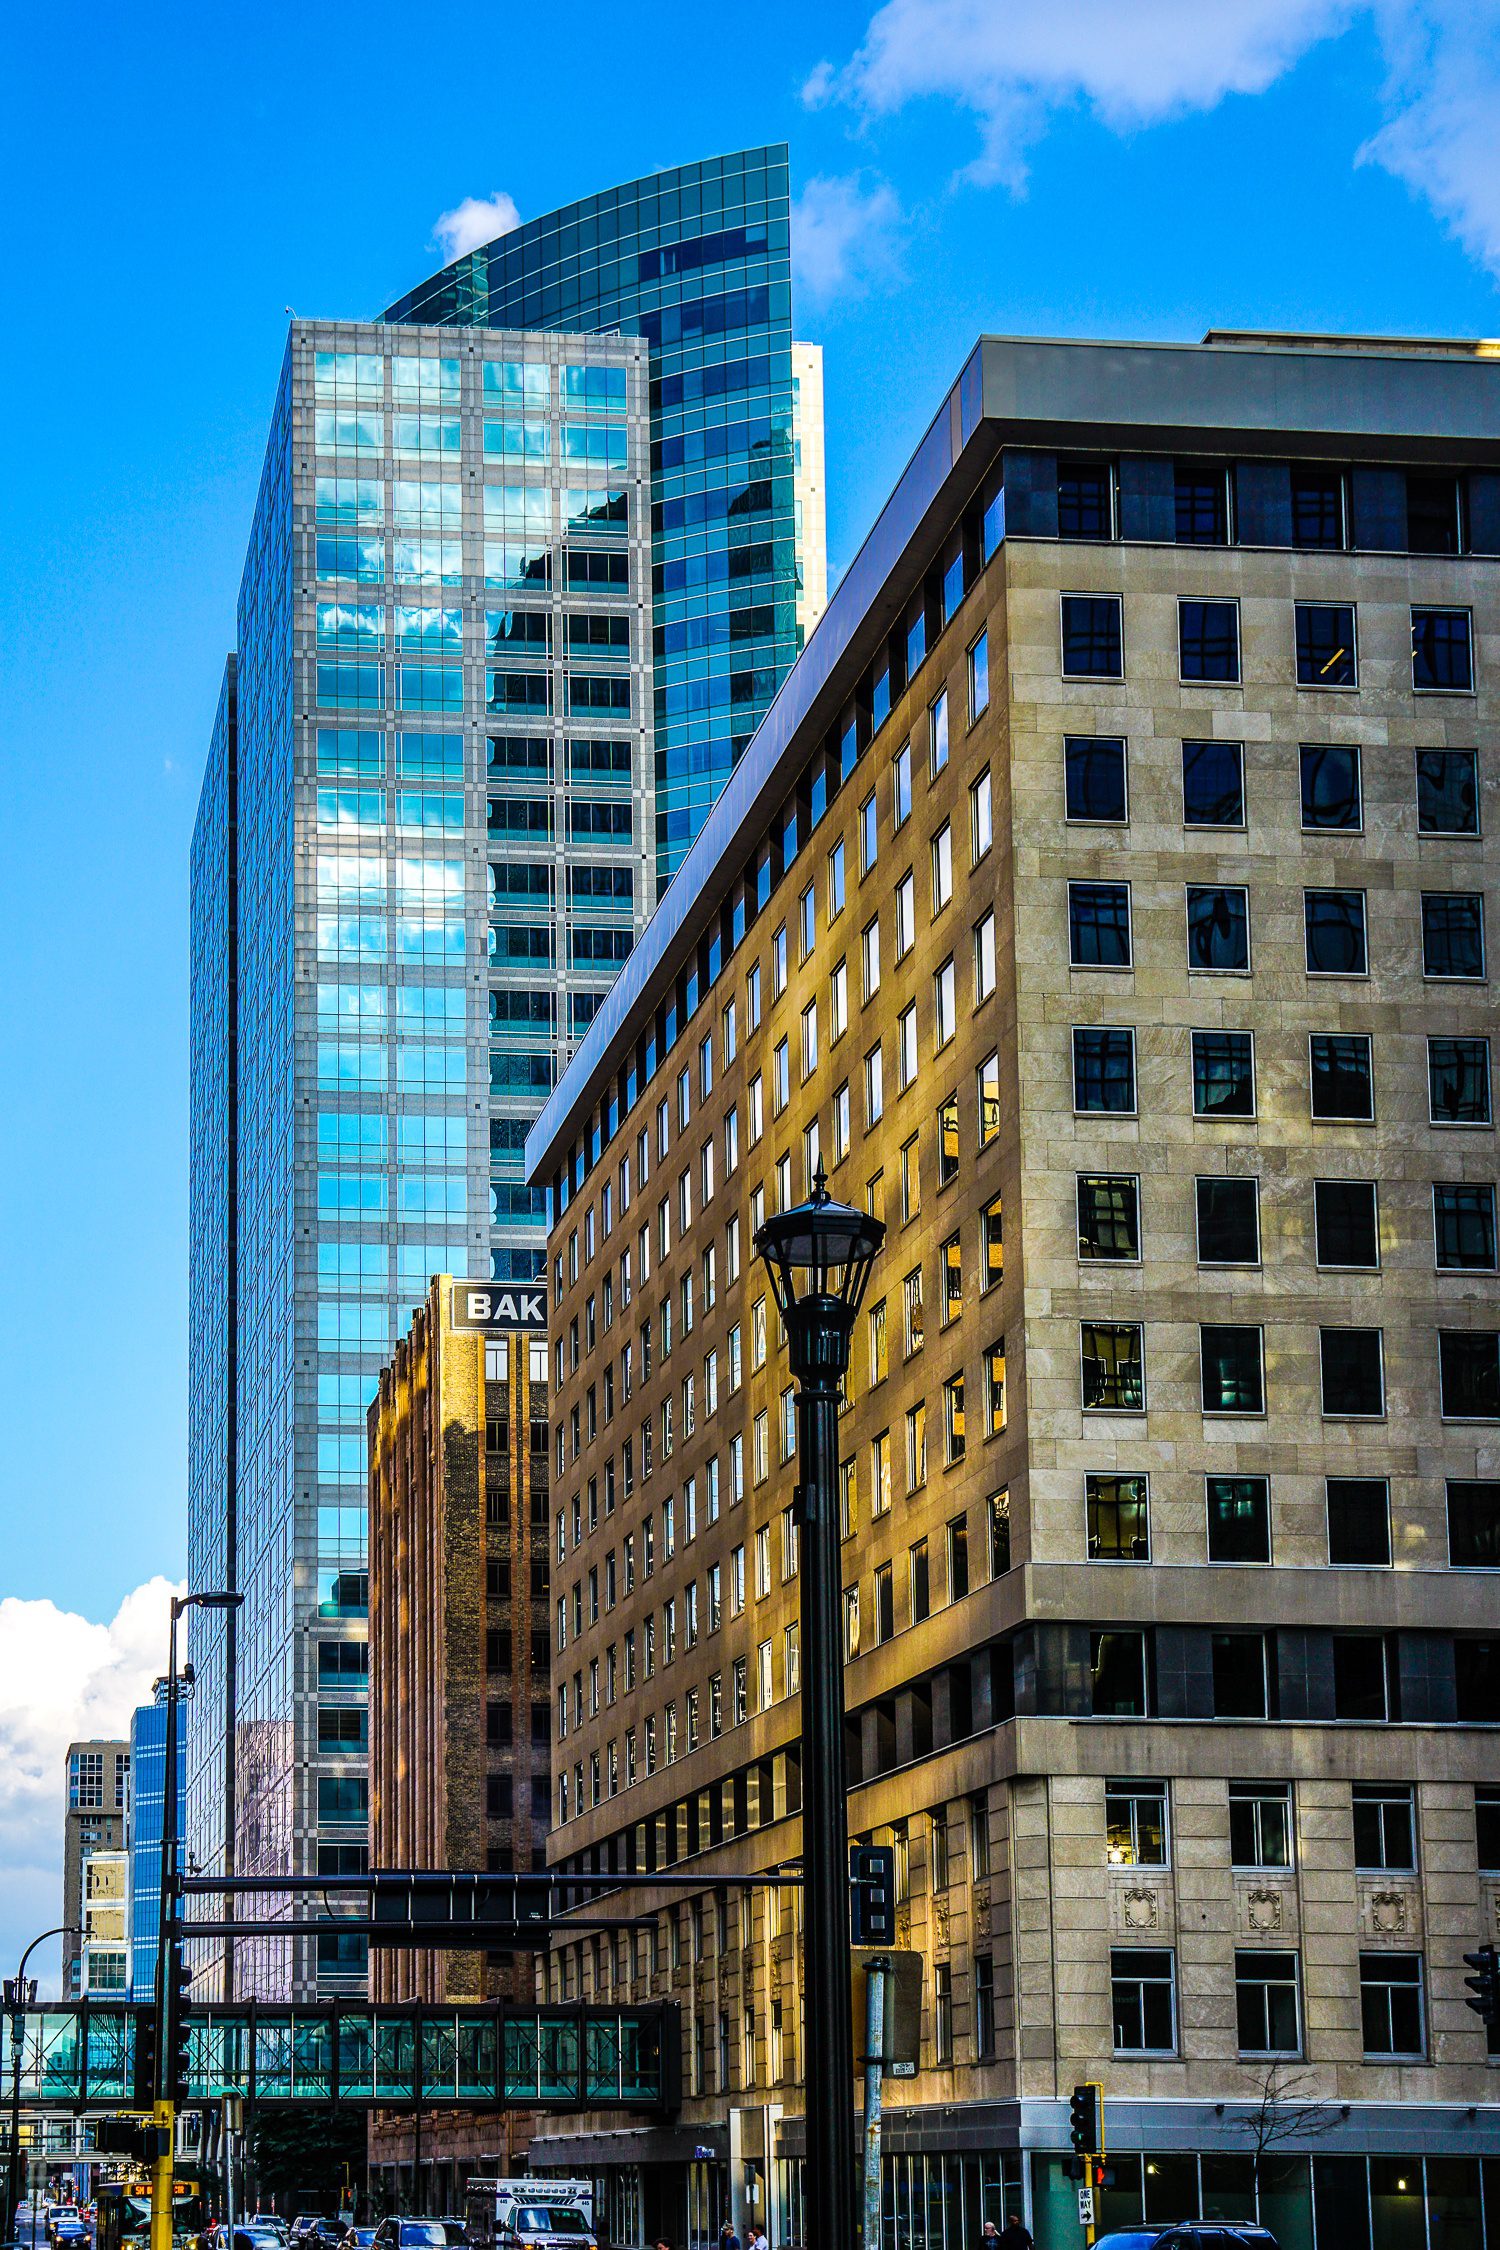 Buildings shimmering with reflected light from nearby glass walls.